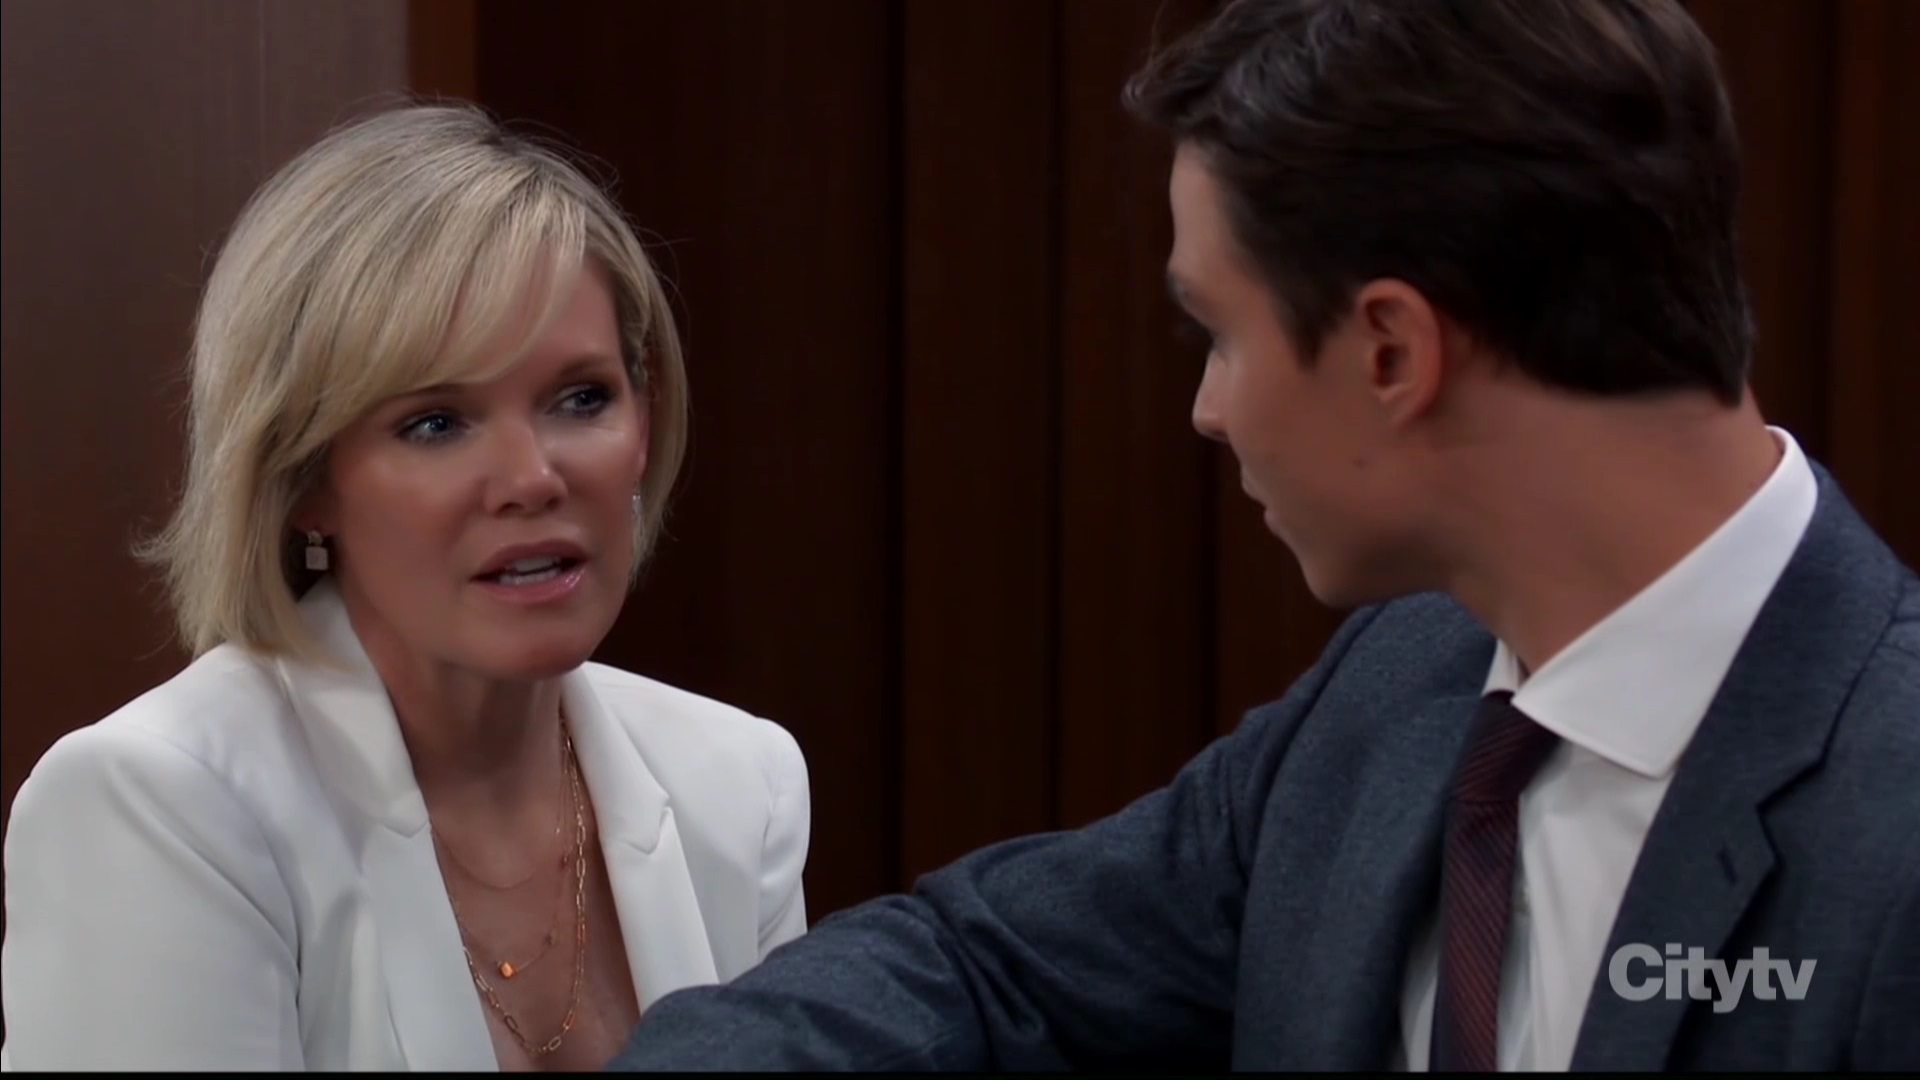 ava on to spence gh